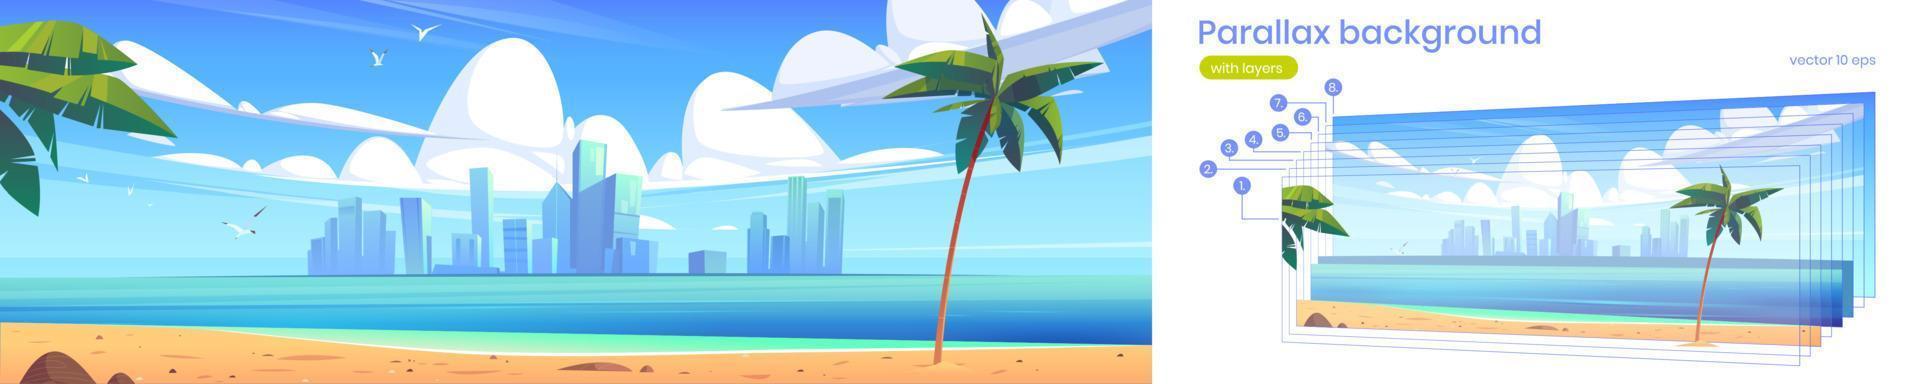 Parallax background with sea and city on horizon vector